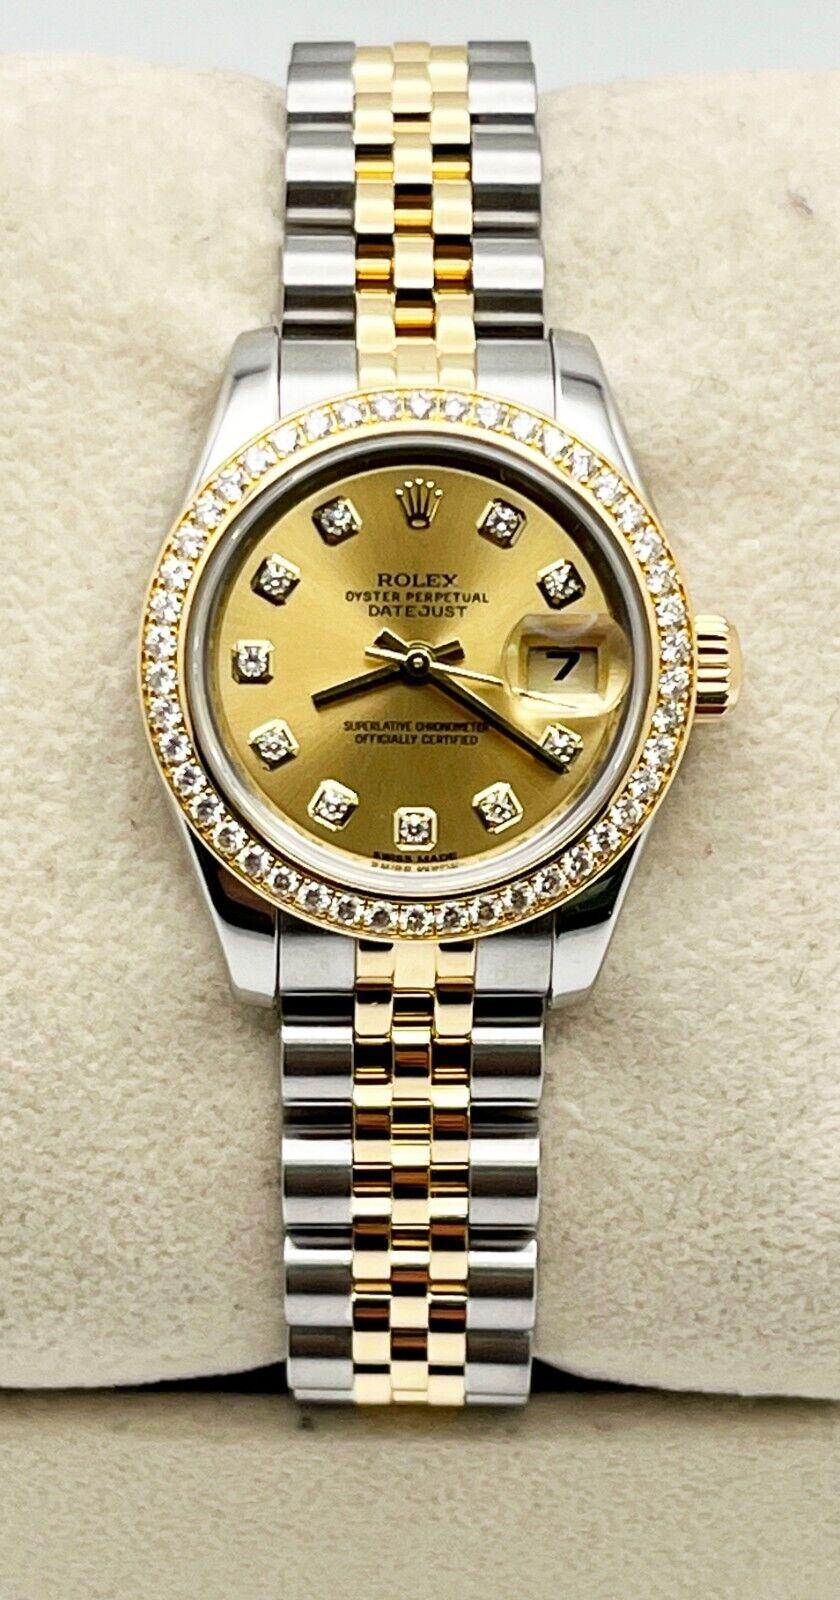 Style Number: 179383

Serial: G434***

Year: 2011
 
Model: Ladies Datejust 
 
Case Material: Stainless Steel 
 
Band: 18K Yellow Gold & Stainless Steel 
 
Bezel: Original Factory Diamond Bezel 
 
Dial: Original Factory Champagne Diamond Dial 
